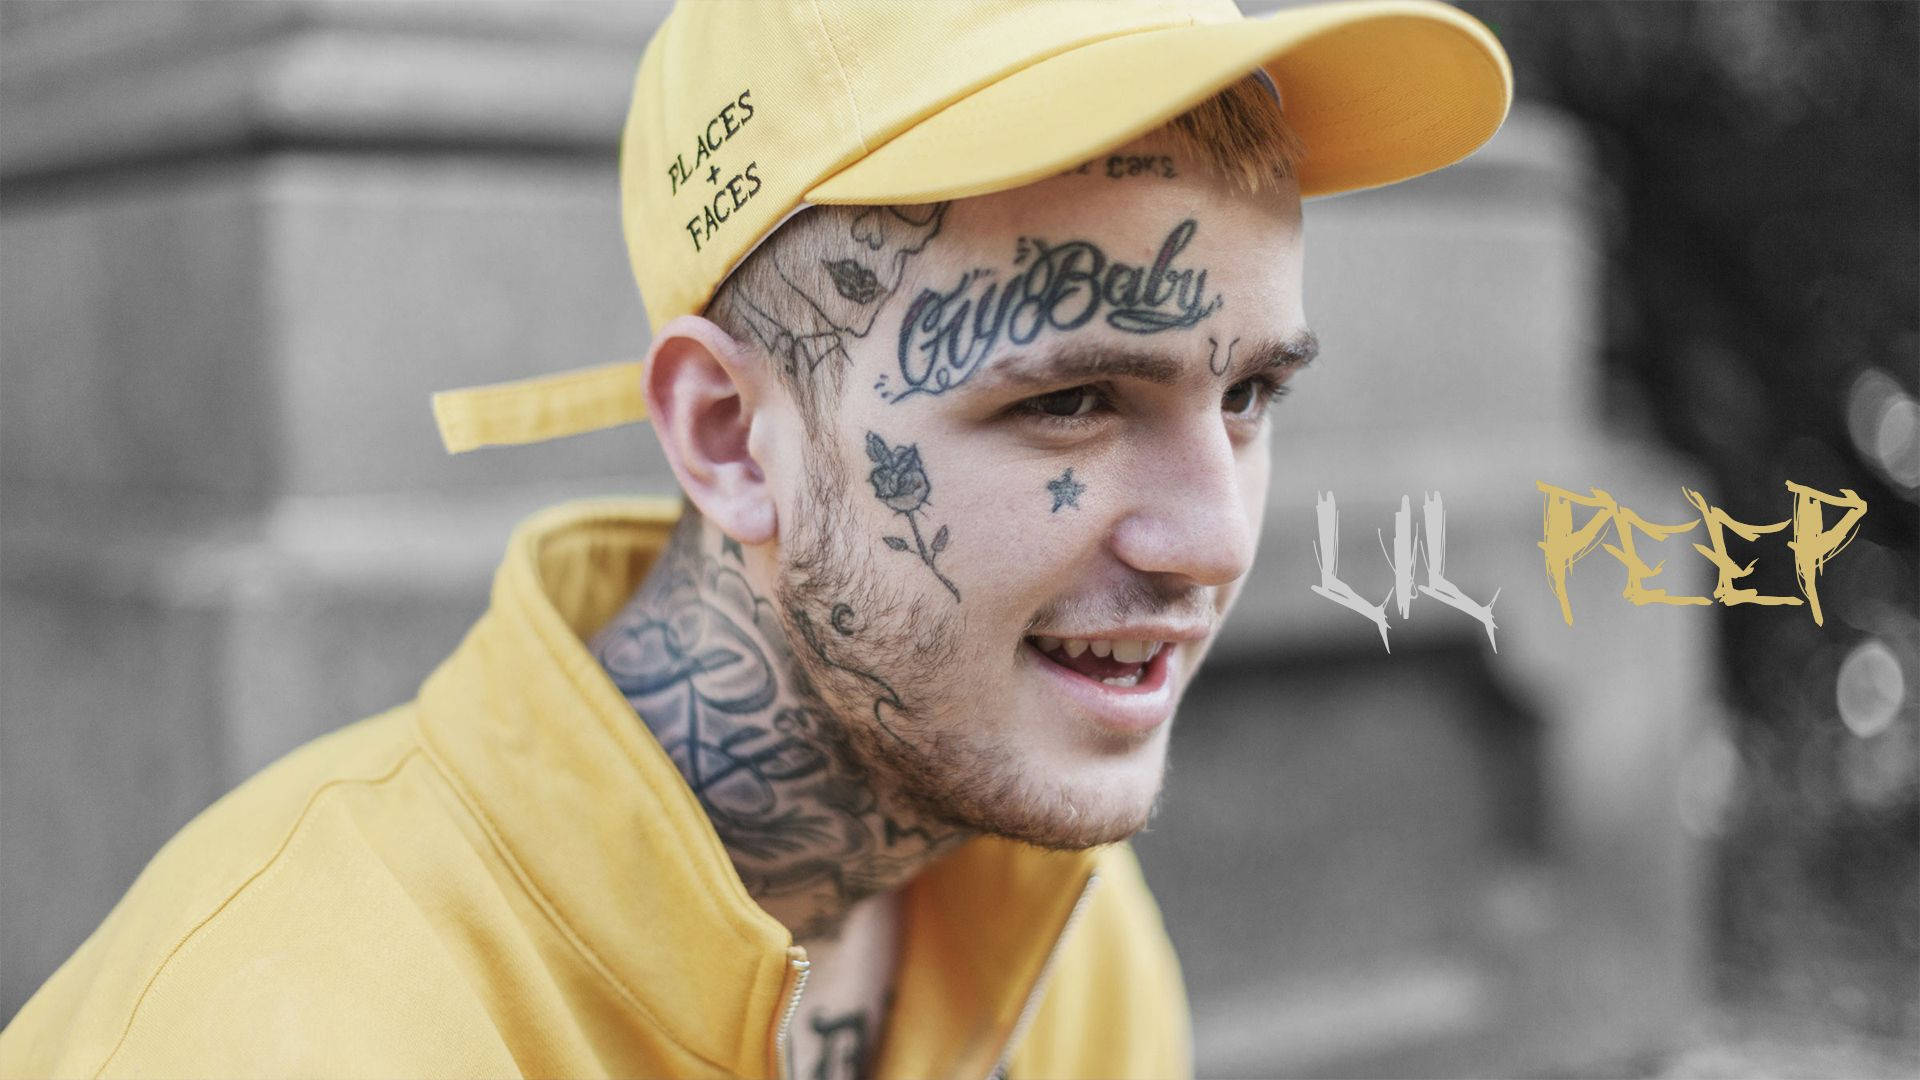 Rapper Lil Peep sits behind the wheel of his car, the Beamer Boy. Wallpaper